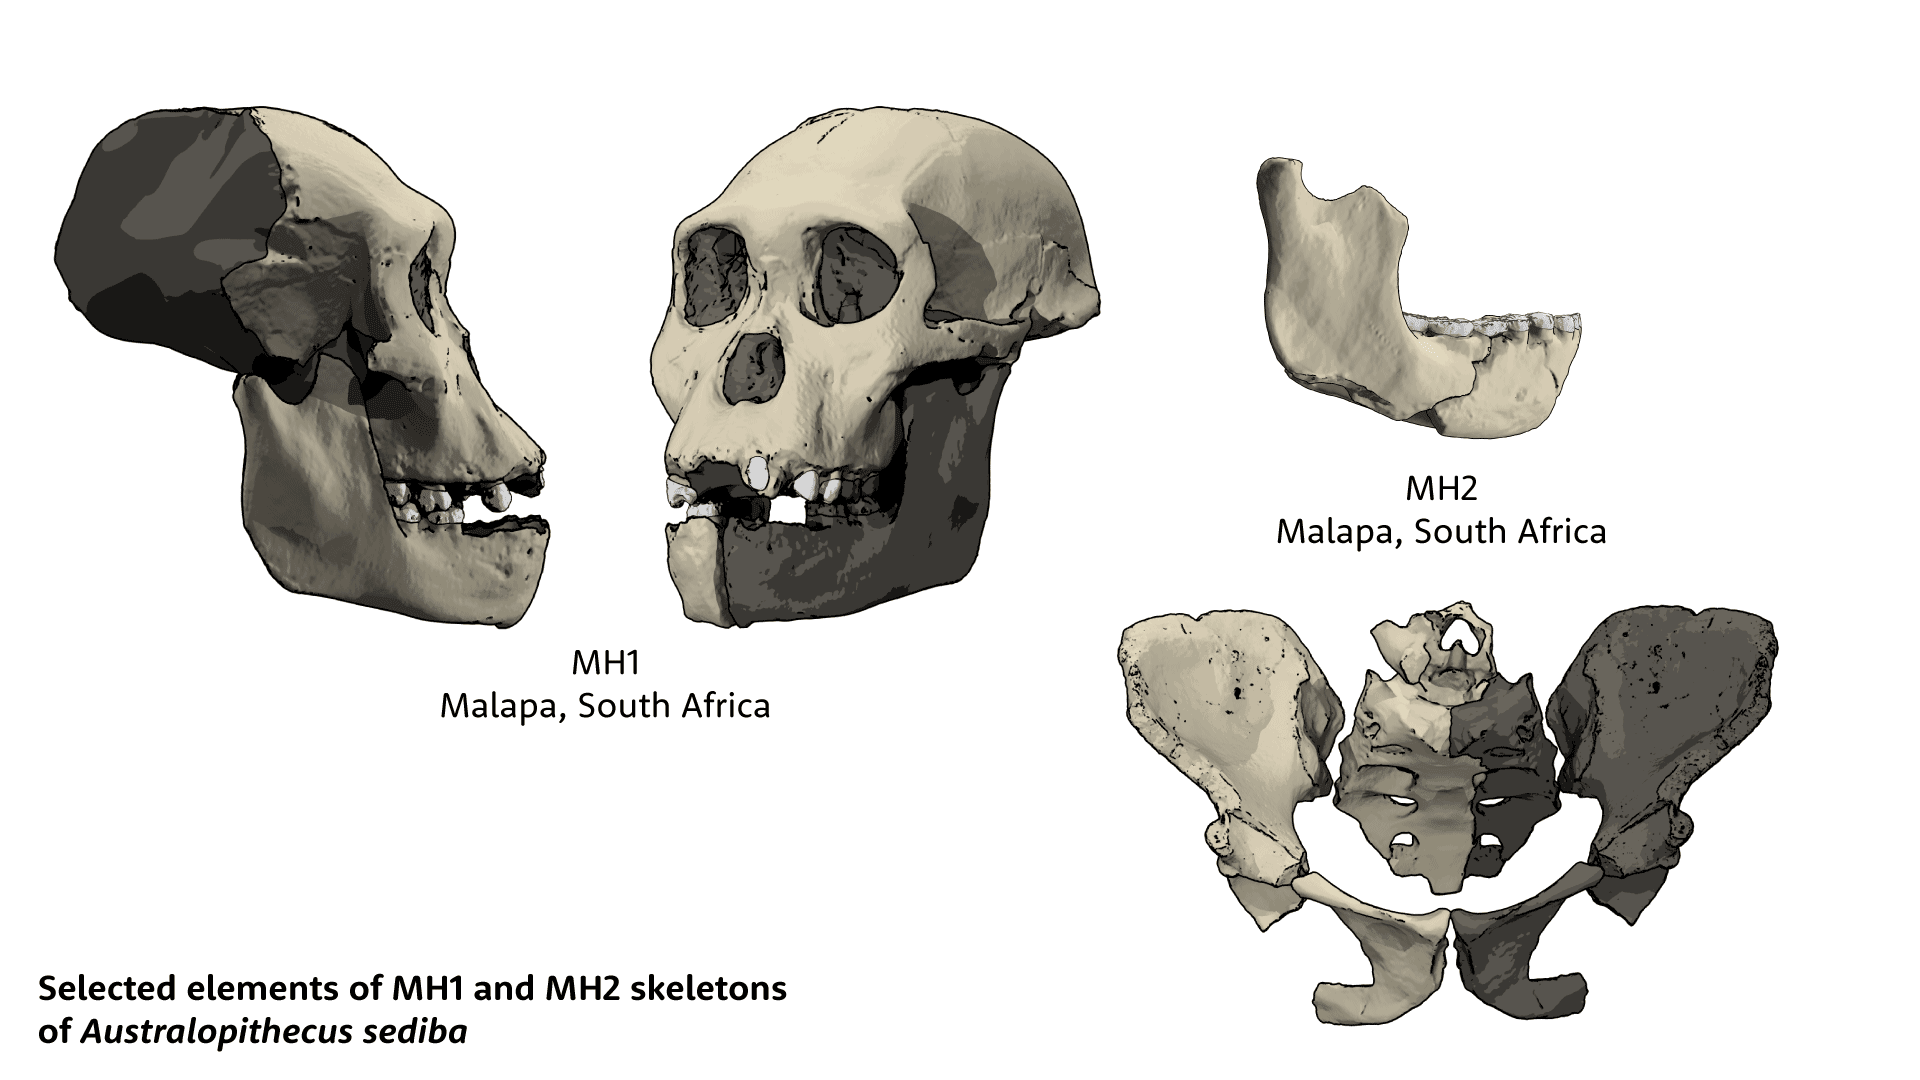 Skull of MH1, mandible and pelvis of MH2